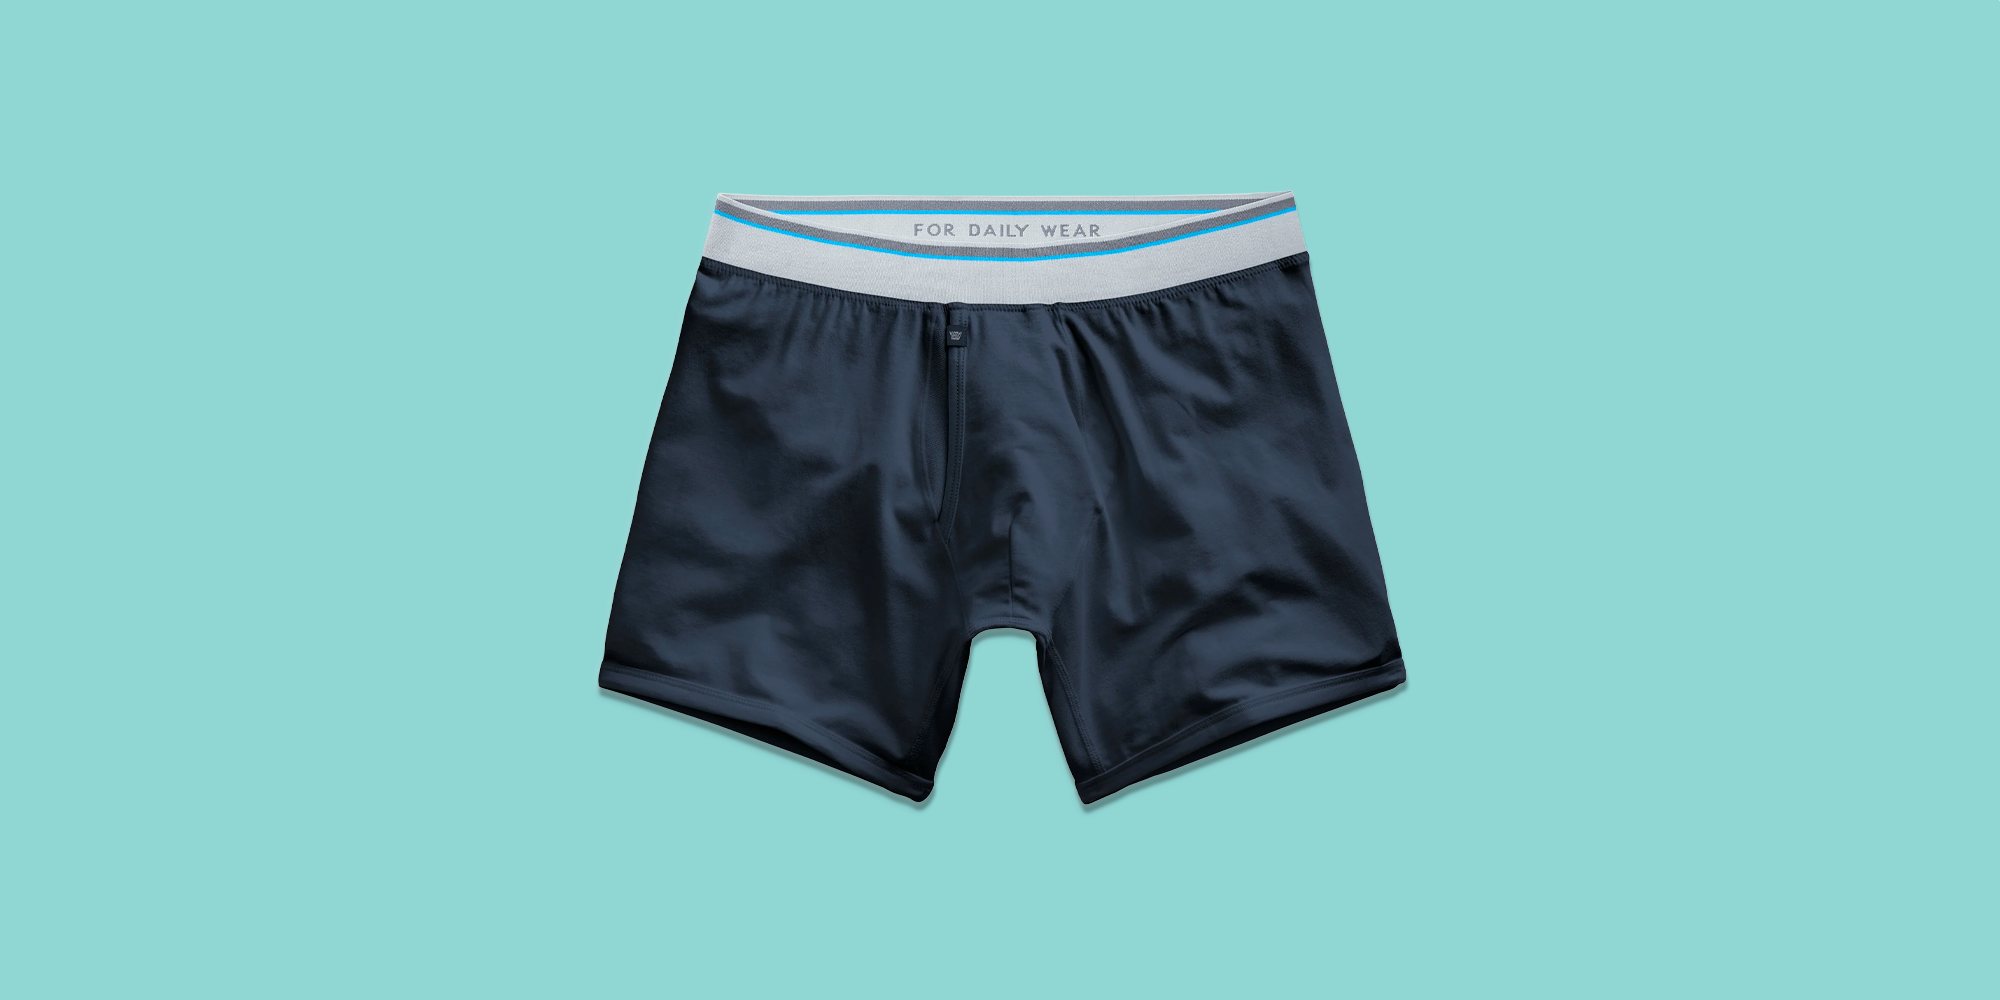 Deal of the Day: Tommy John Men's Underwear is on sale at  —  Save 30 percent